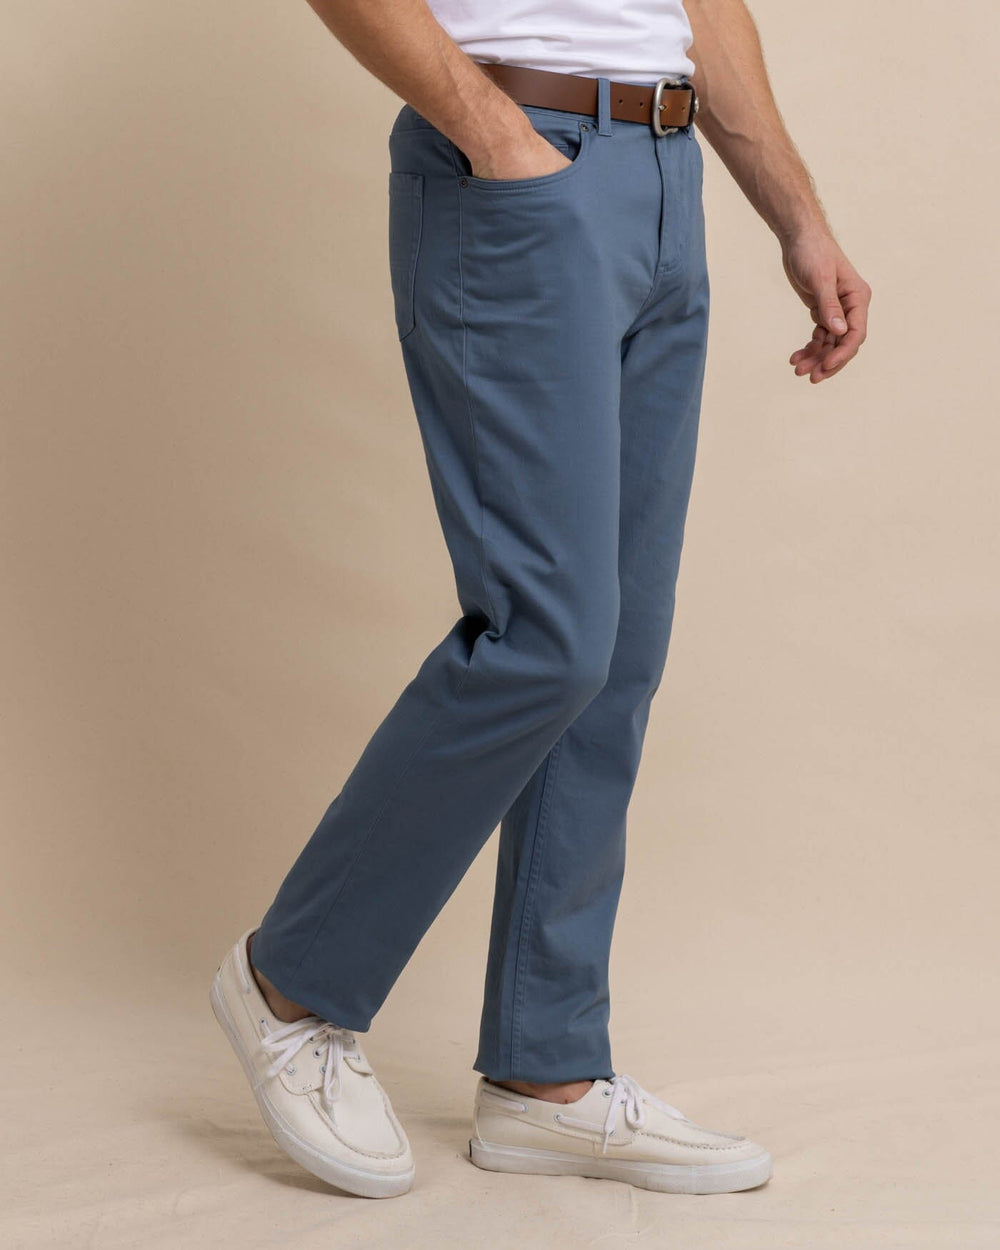 The front view of the Southern Tide Sullivan Five Pocket Pant Blue Haze by Southern Tide - Blue Haze